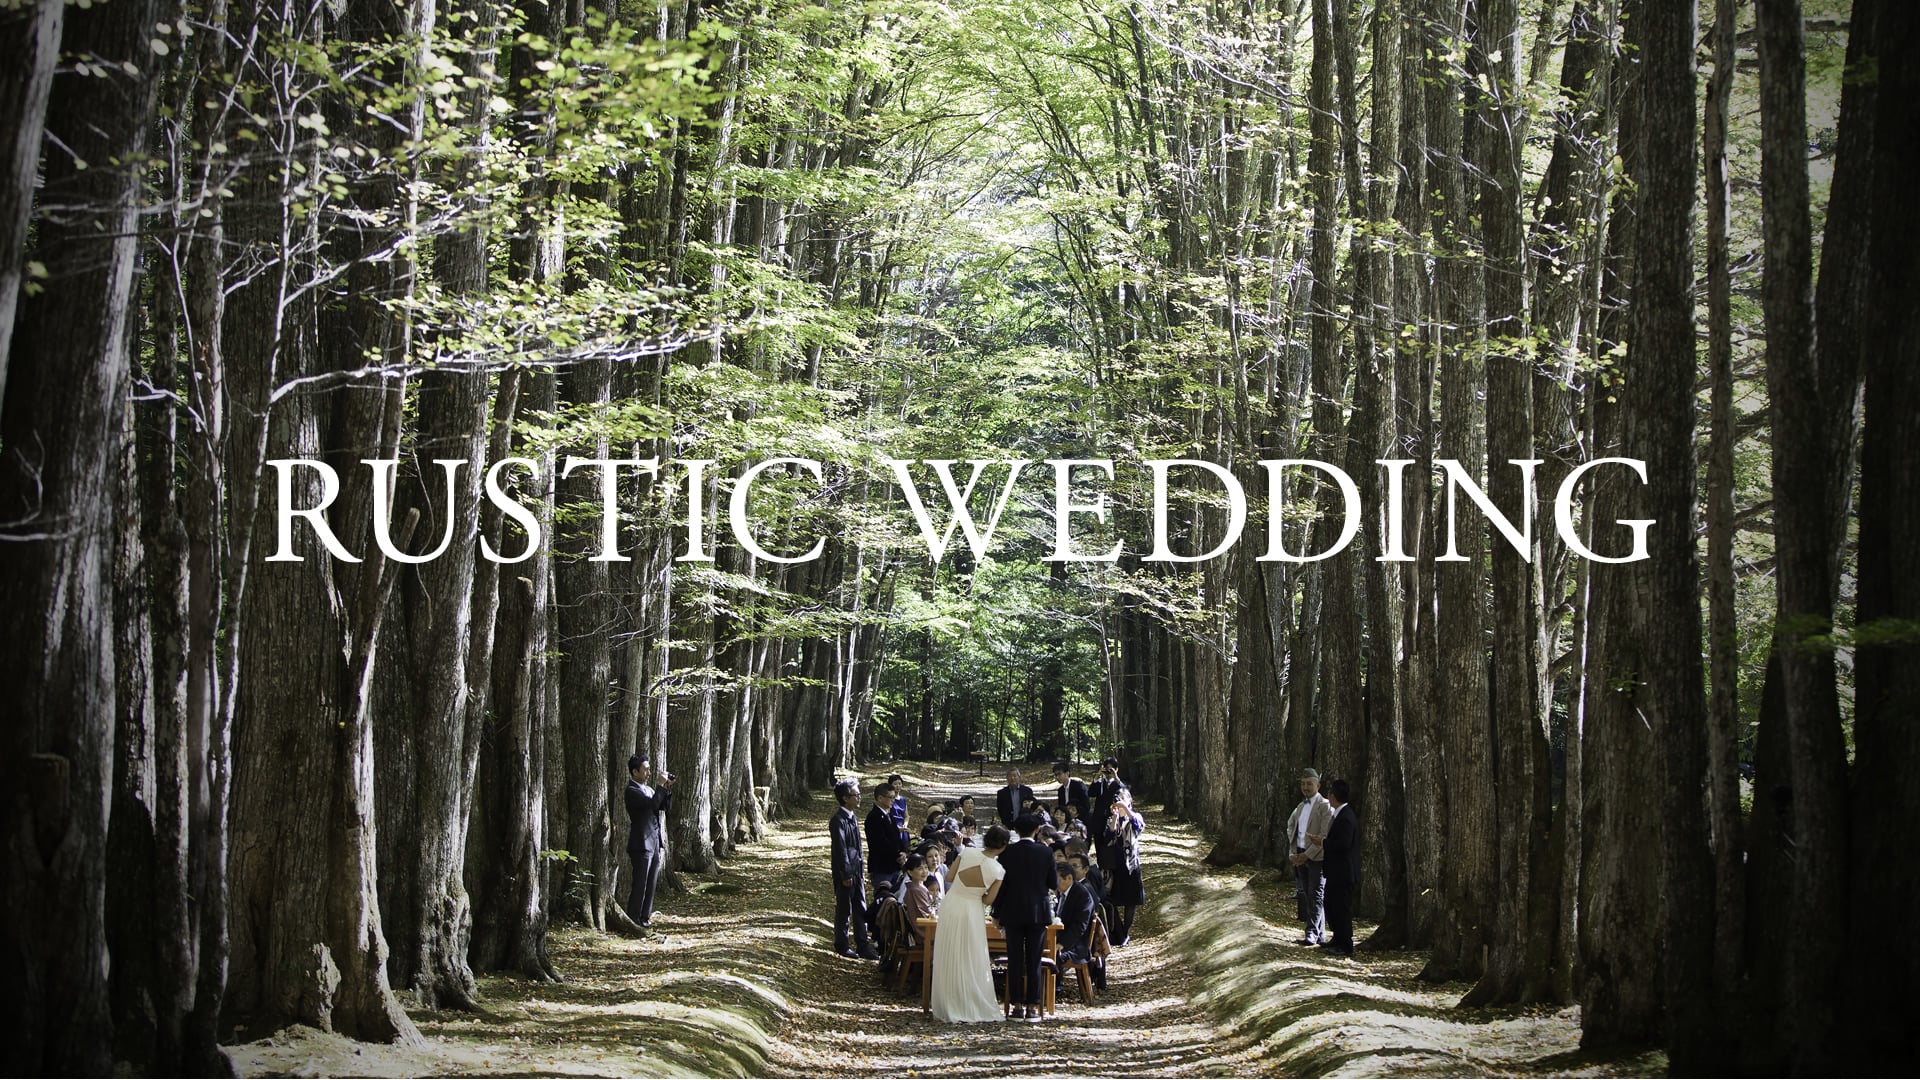 THE RUSTIC WEDDING - FALL - by POINT MAKERS